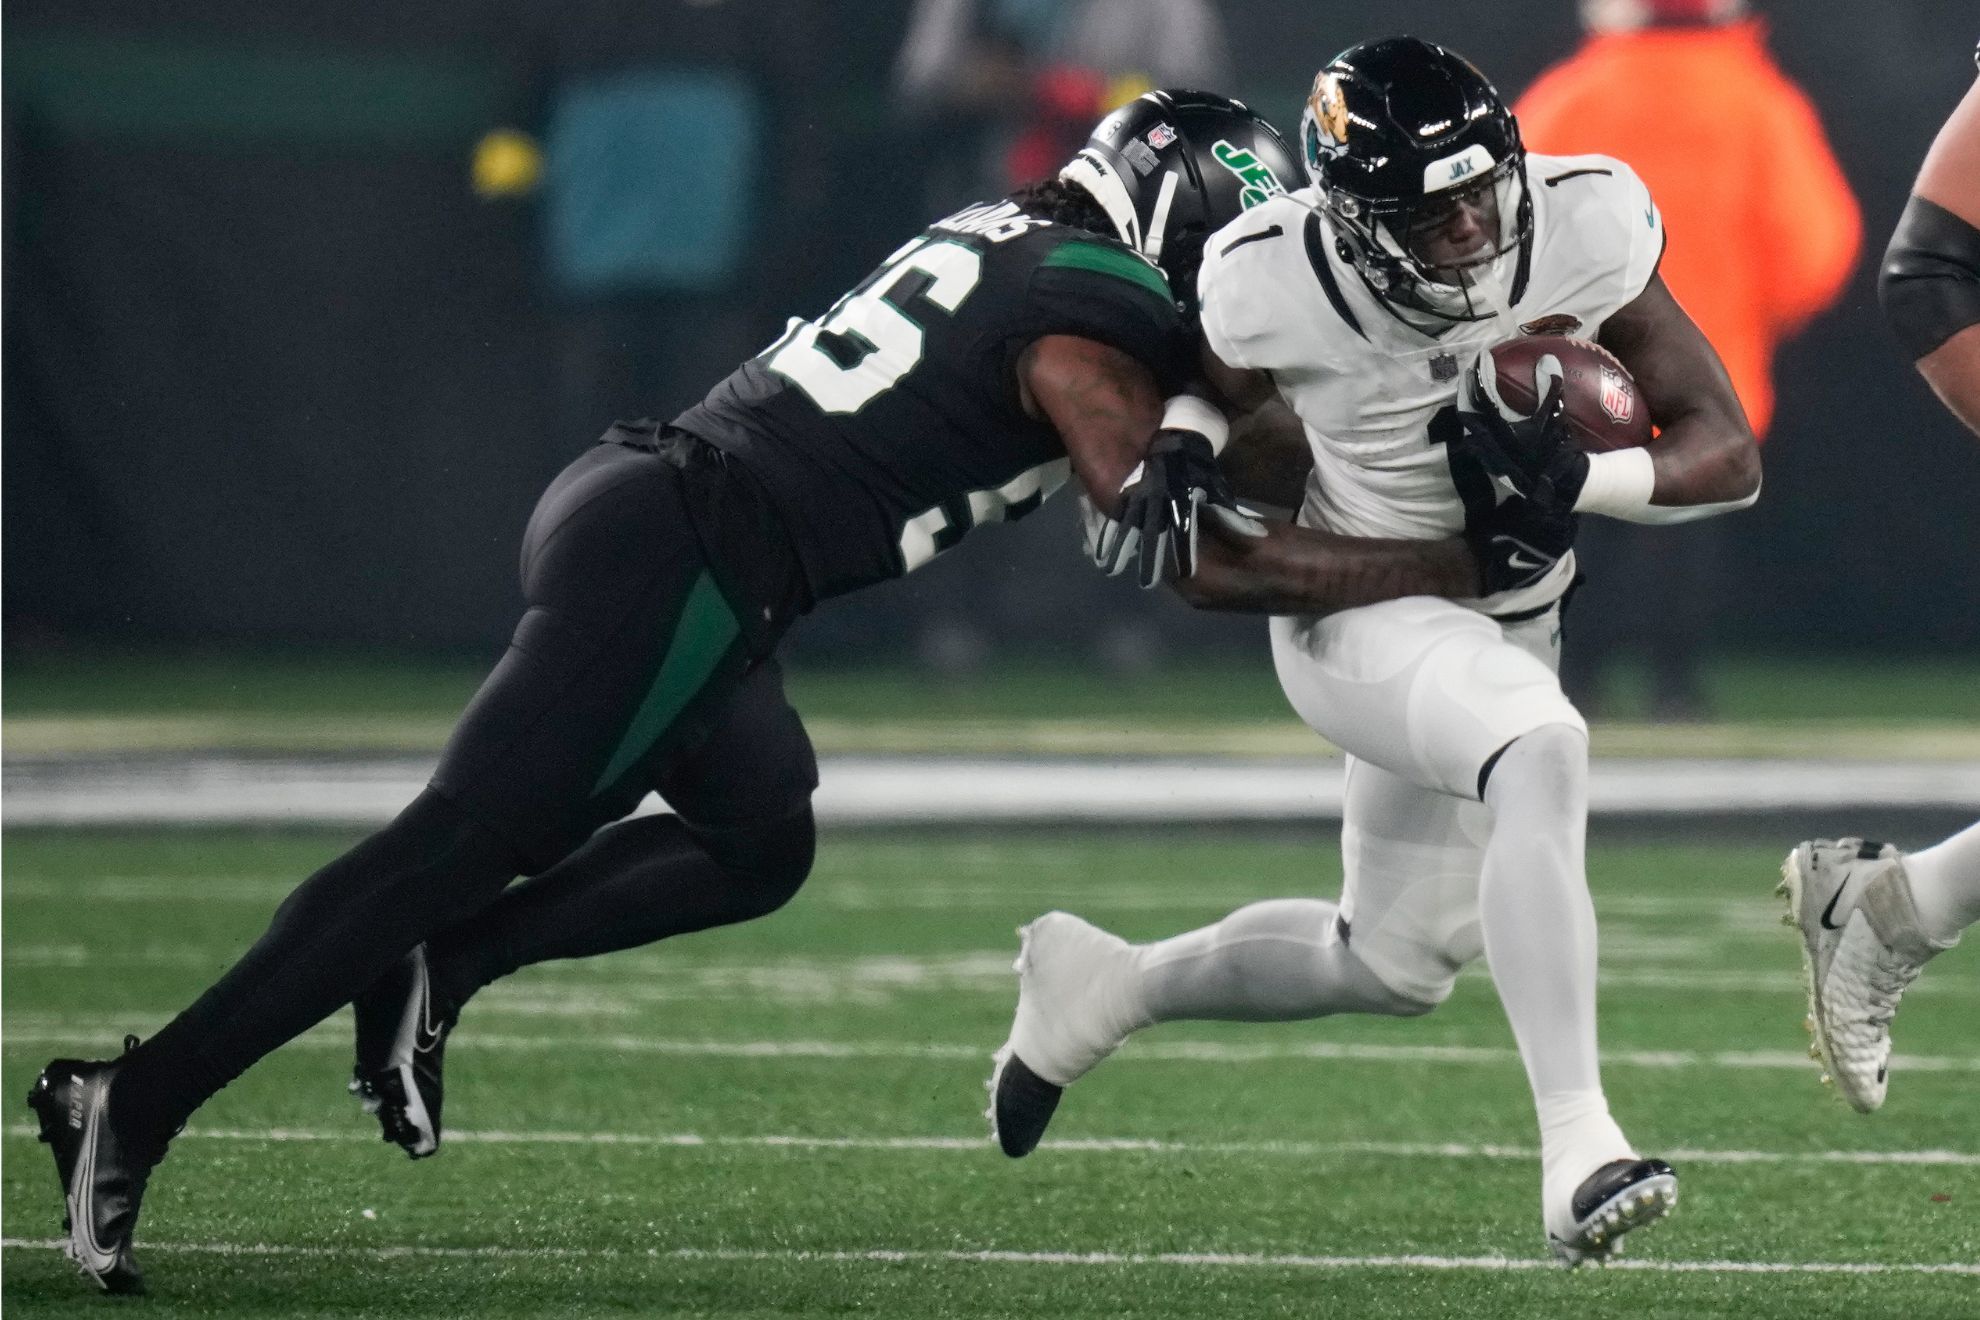 Jaguars-Jets: Final score, full highlights and play-by-play